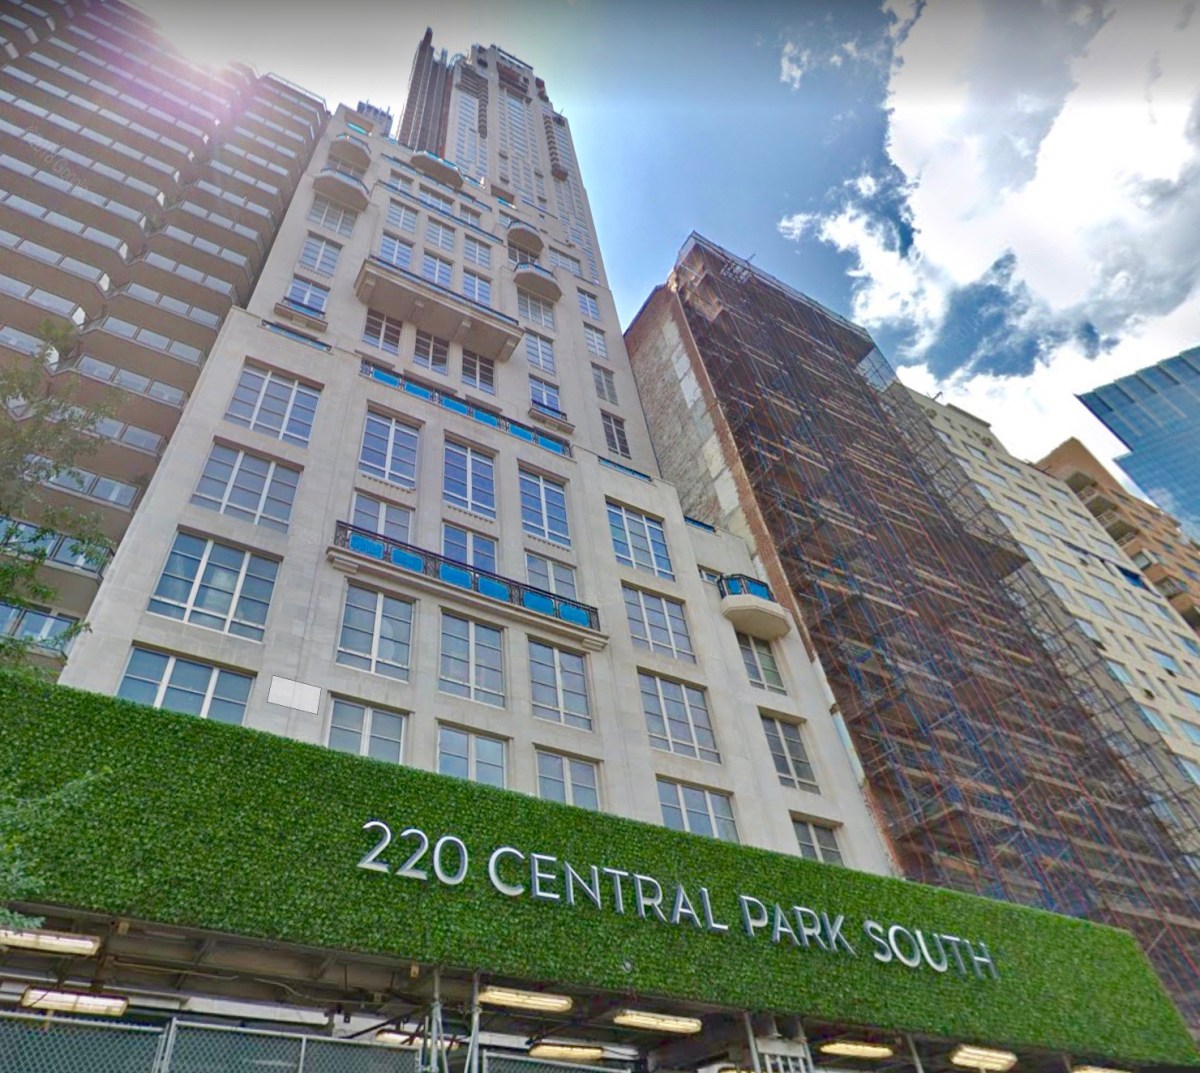 220 Central Park South – from Google Maps